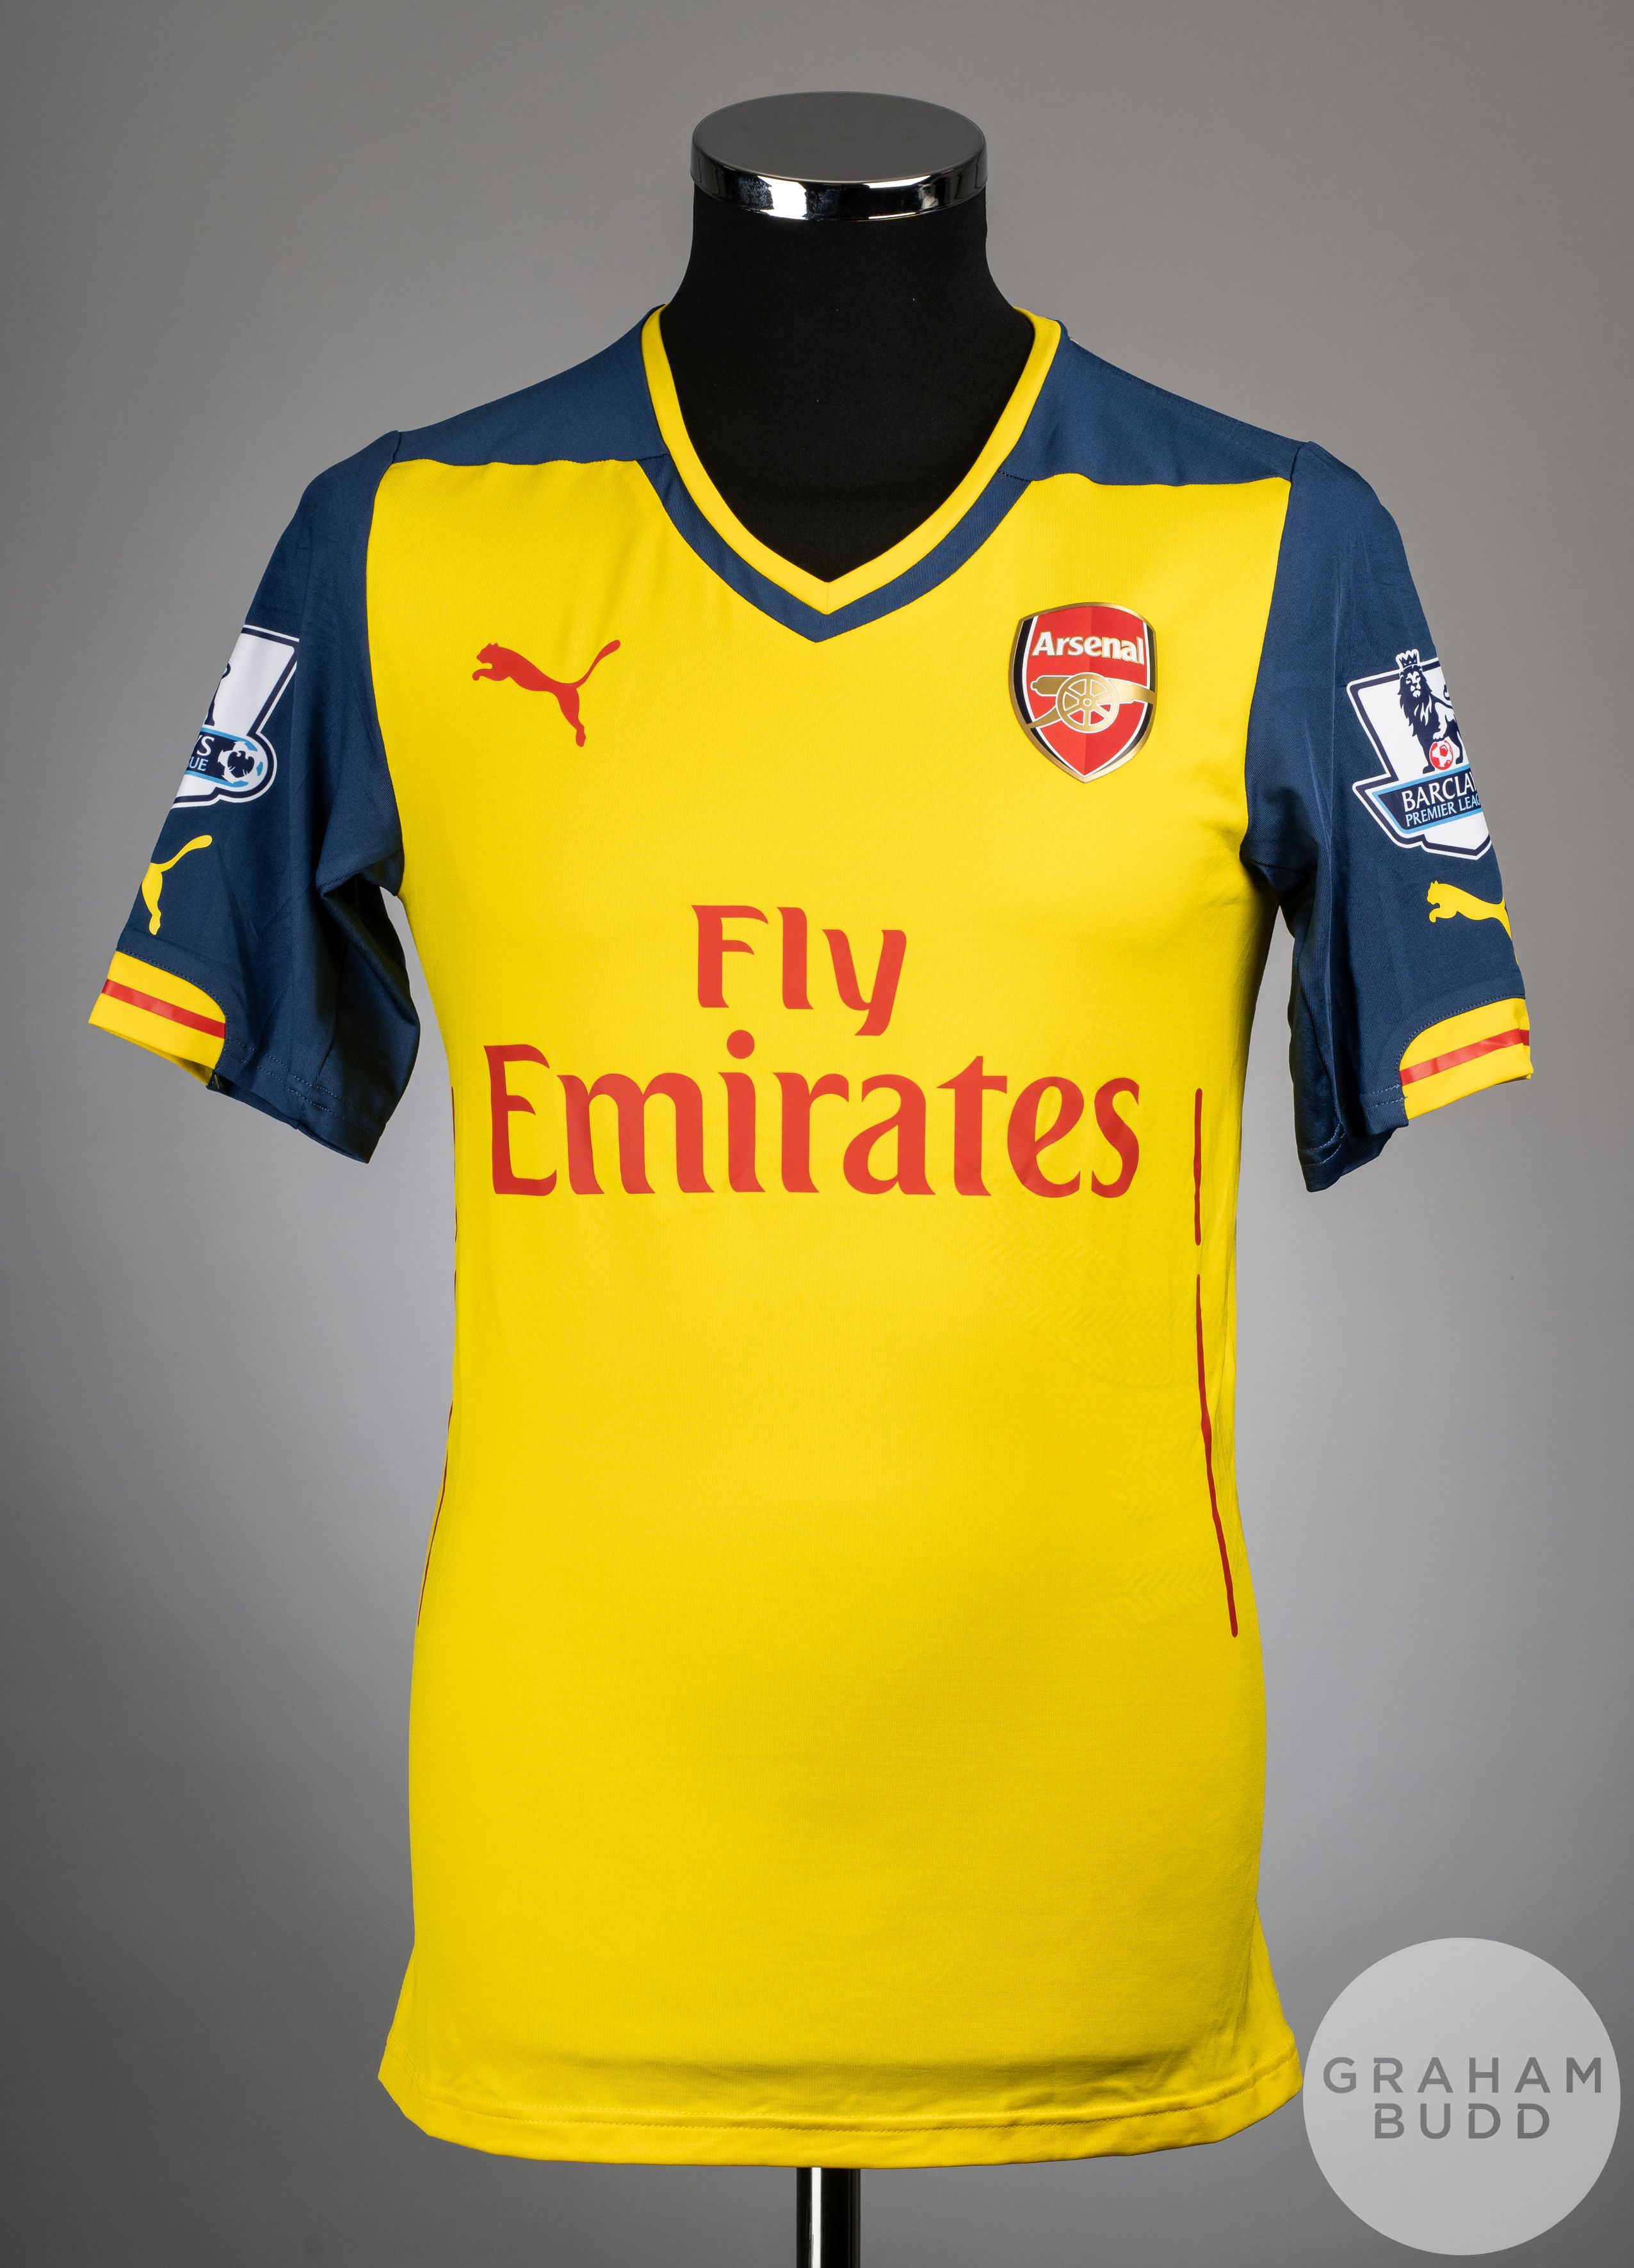 Danny Welbeck yellow and blue No.23 Arsenal match worn short-sleeved shirt, 2014-15